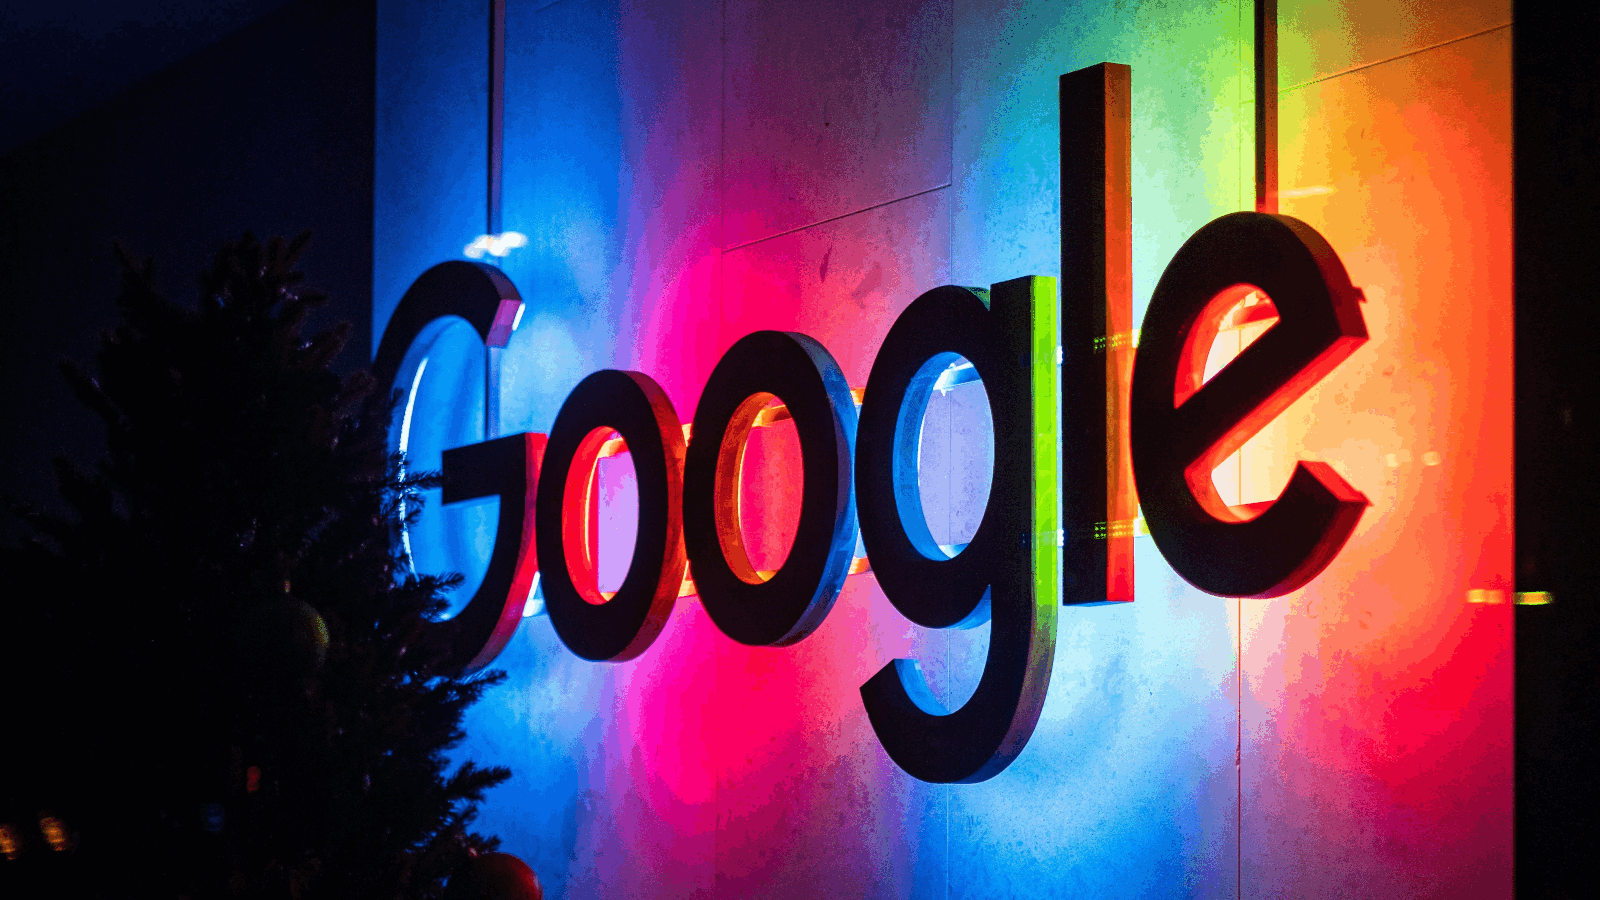 Google paid $12 million in bug bounties to security researchers